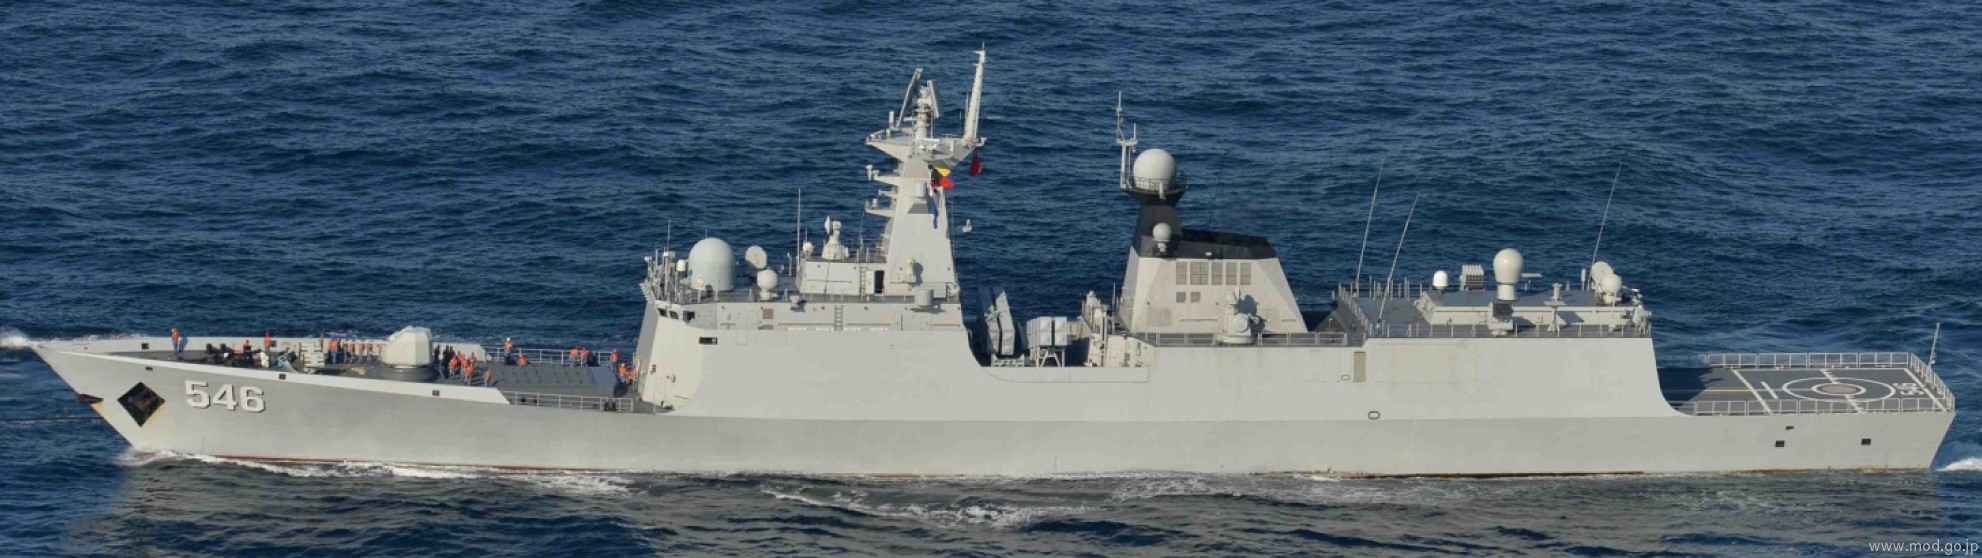 ffg-546 plans yancheng type 054a jiangkai ii class guided missile frigate china people's liberation army navy 03